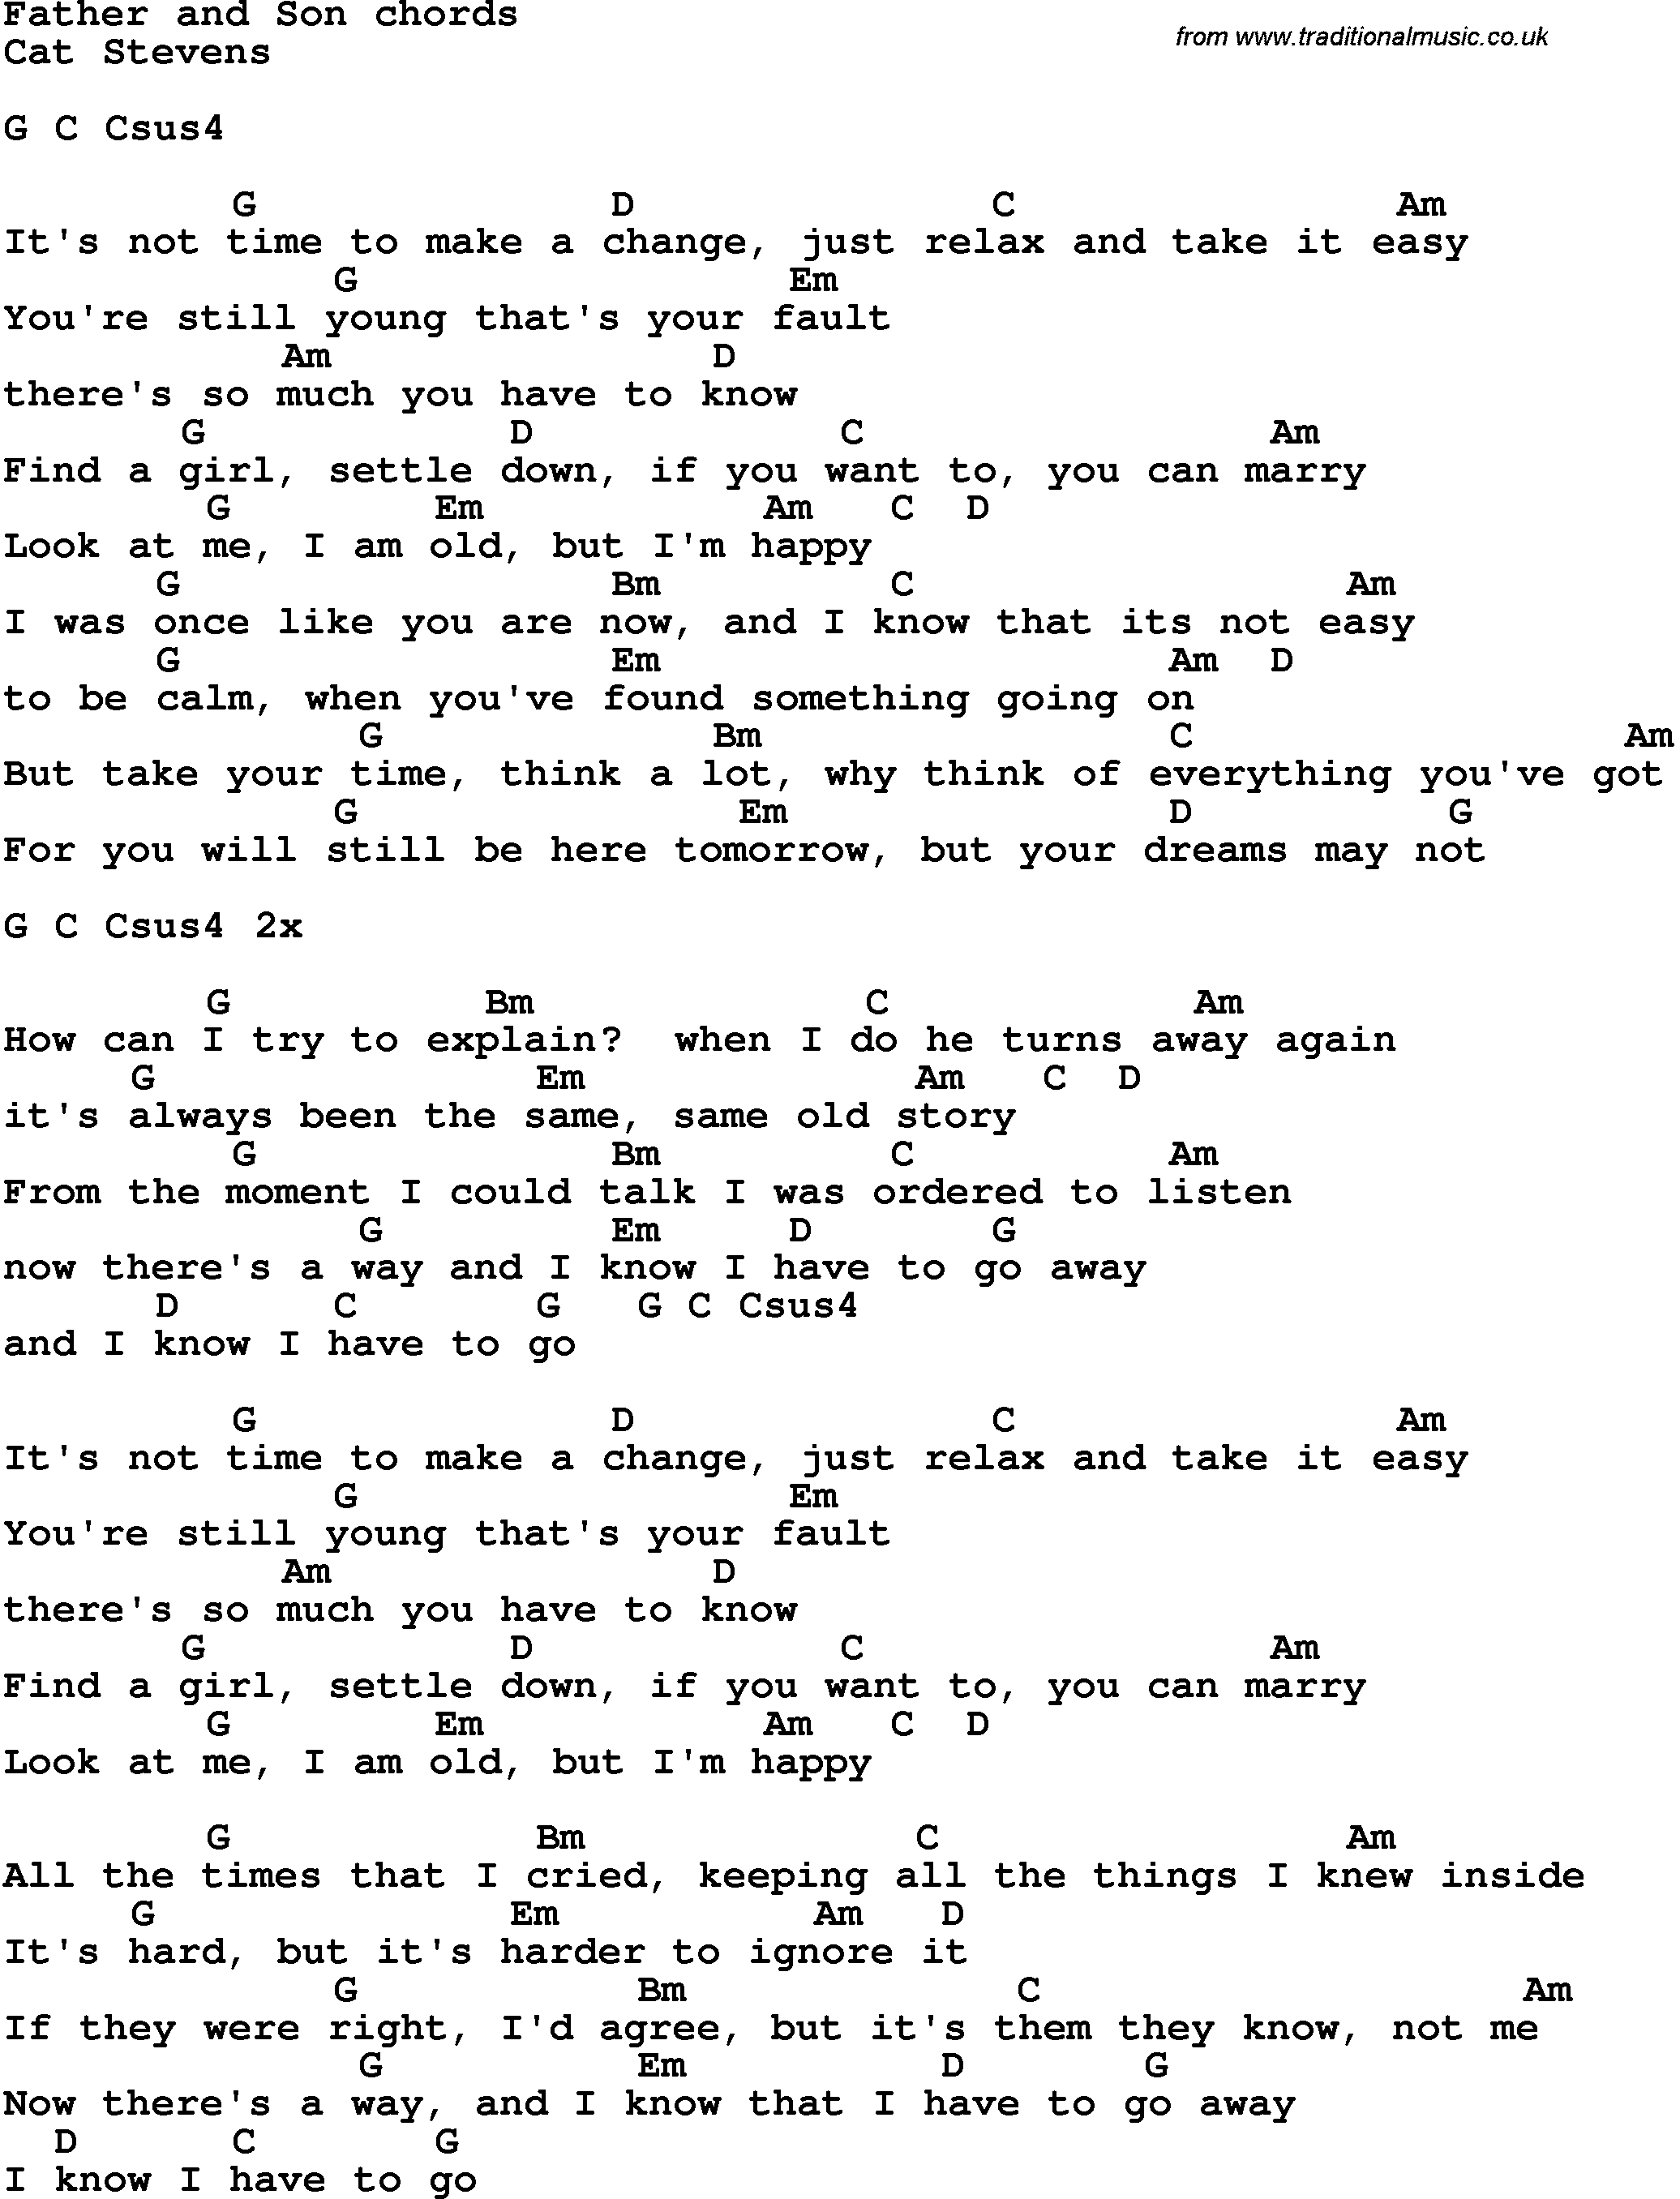 Song Lyrics with guitar chords for Father And Son